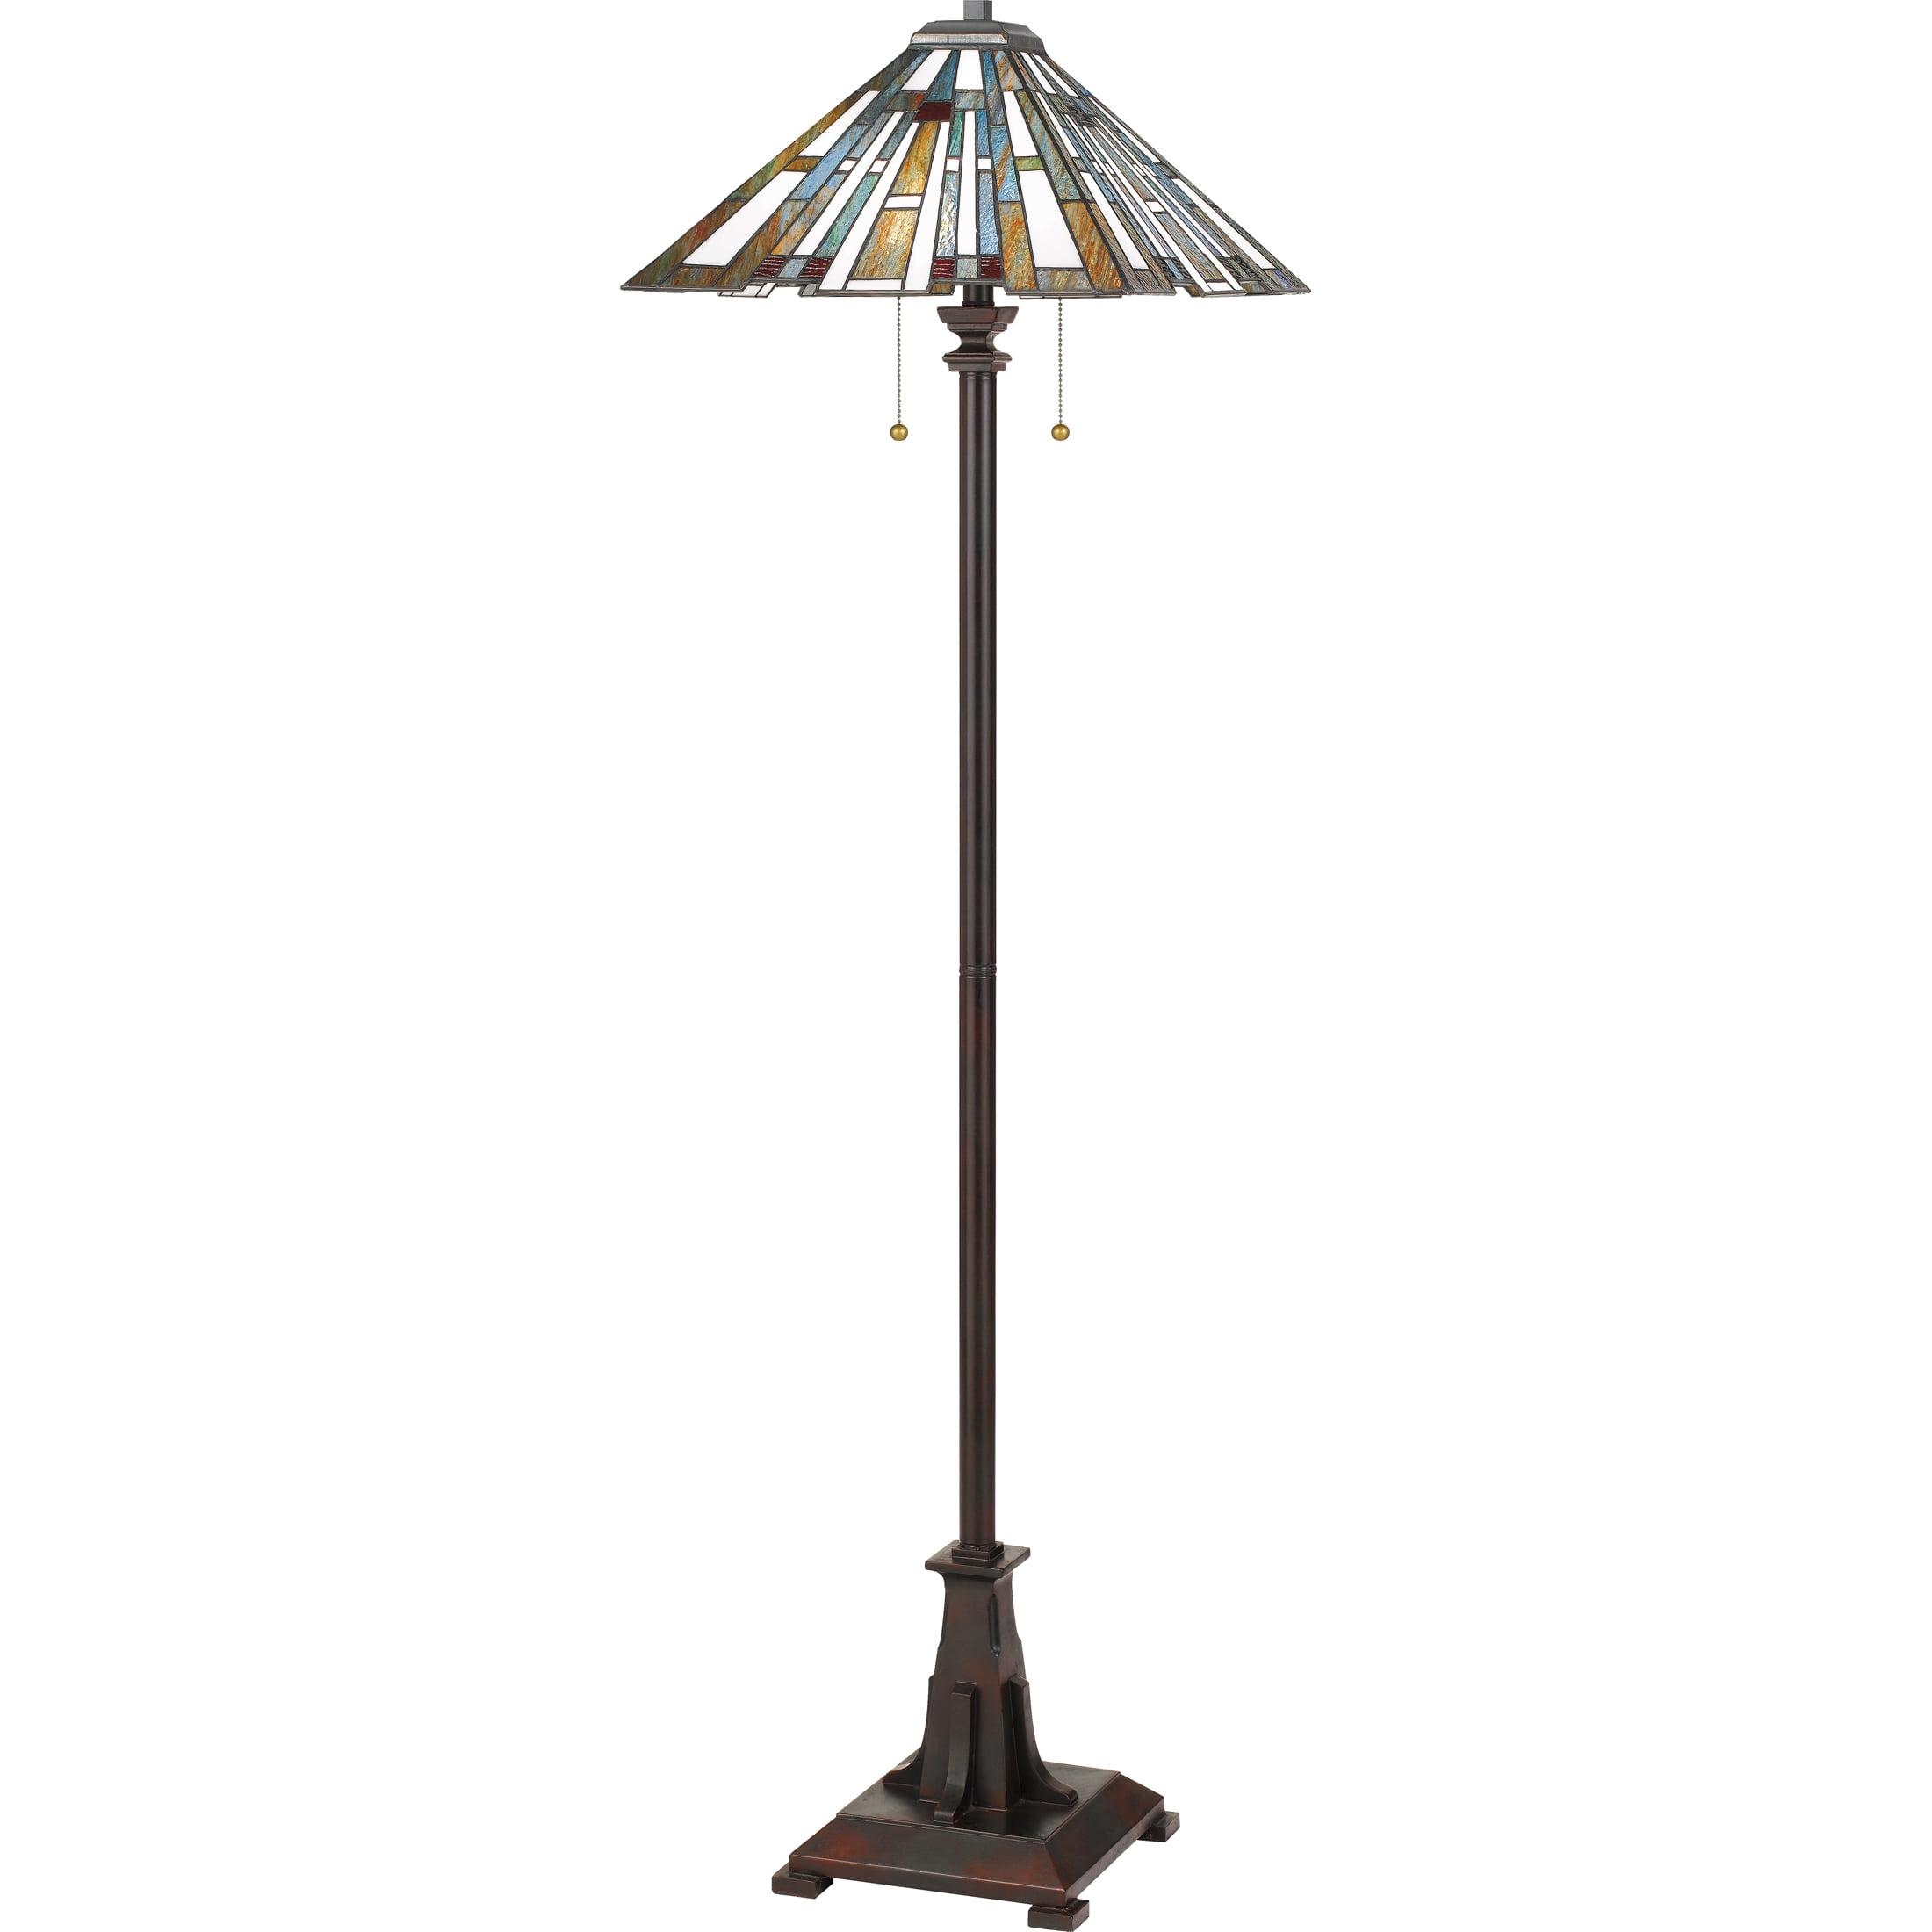 Valiant Bronze Tiffany-Style Stained Glass Floor Lamp